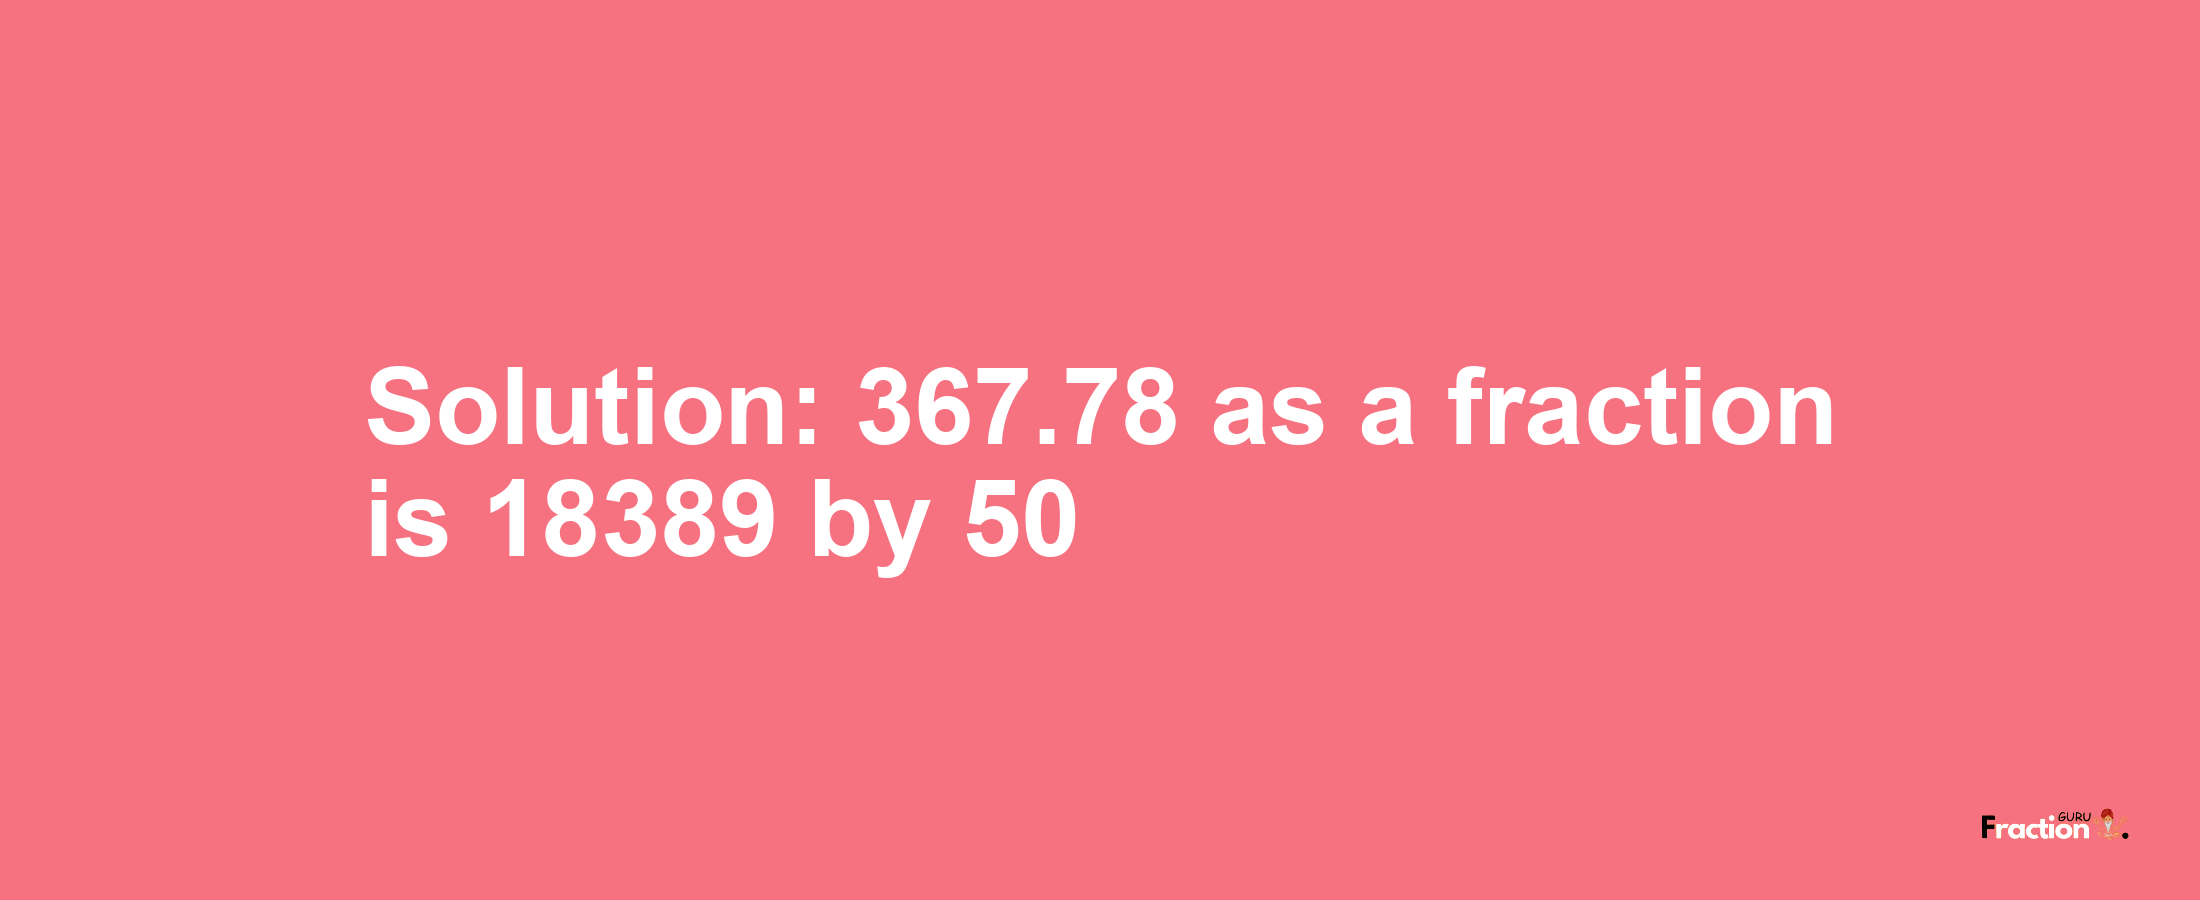 Solution:367.78 as a fraction is 18389/50